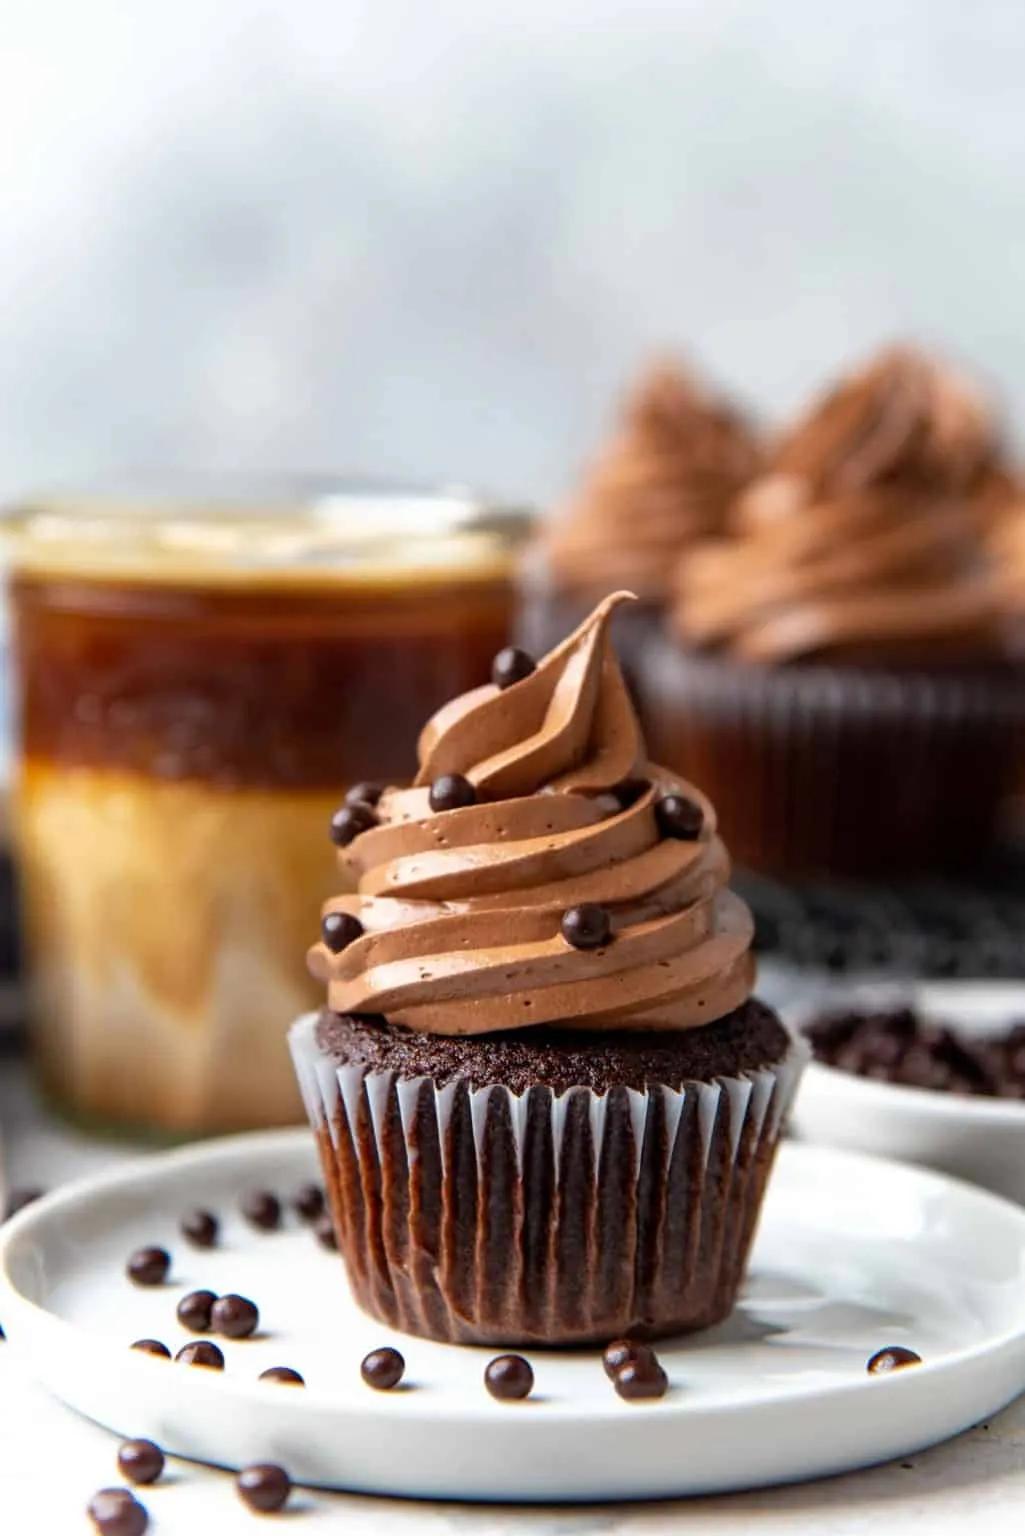 Perfect Chocolate Cupcakes (Easy, one bowl recipe) - The Flavor Bender